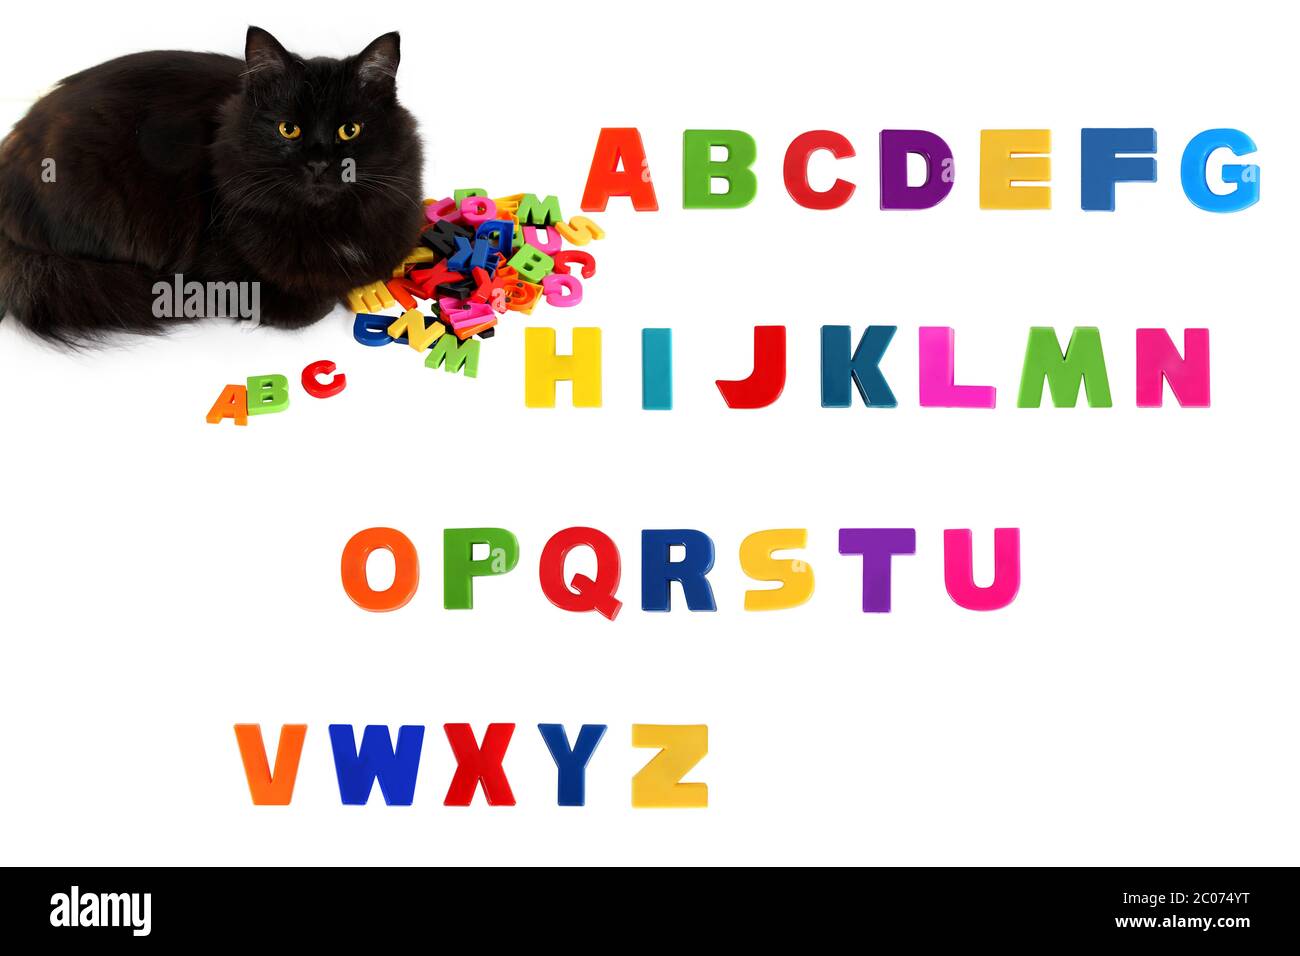 Alphabet letters and black cat on white background. Stock Photo